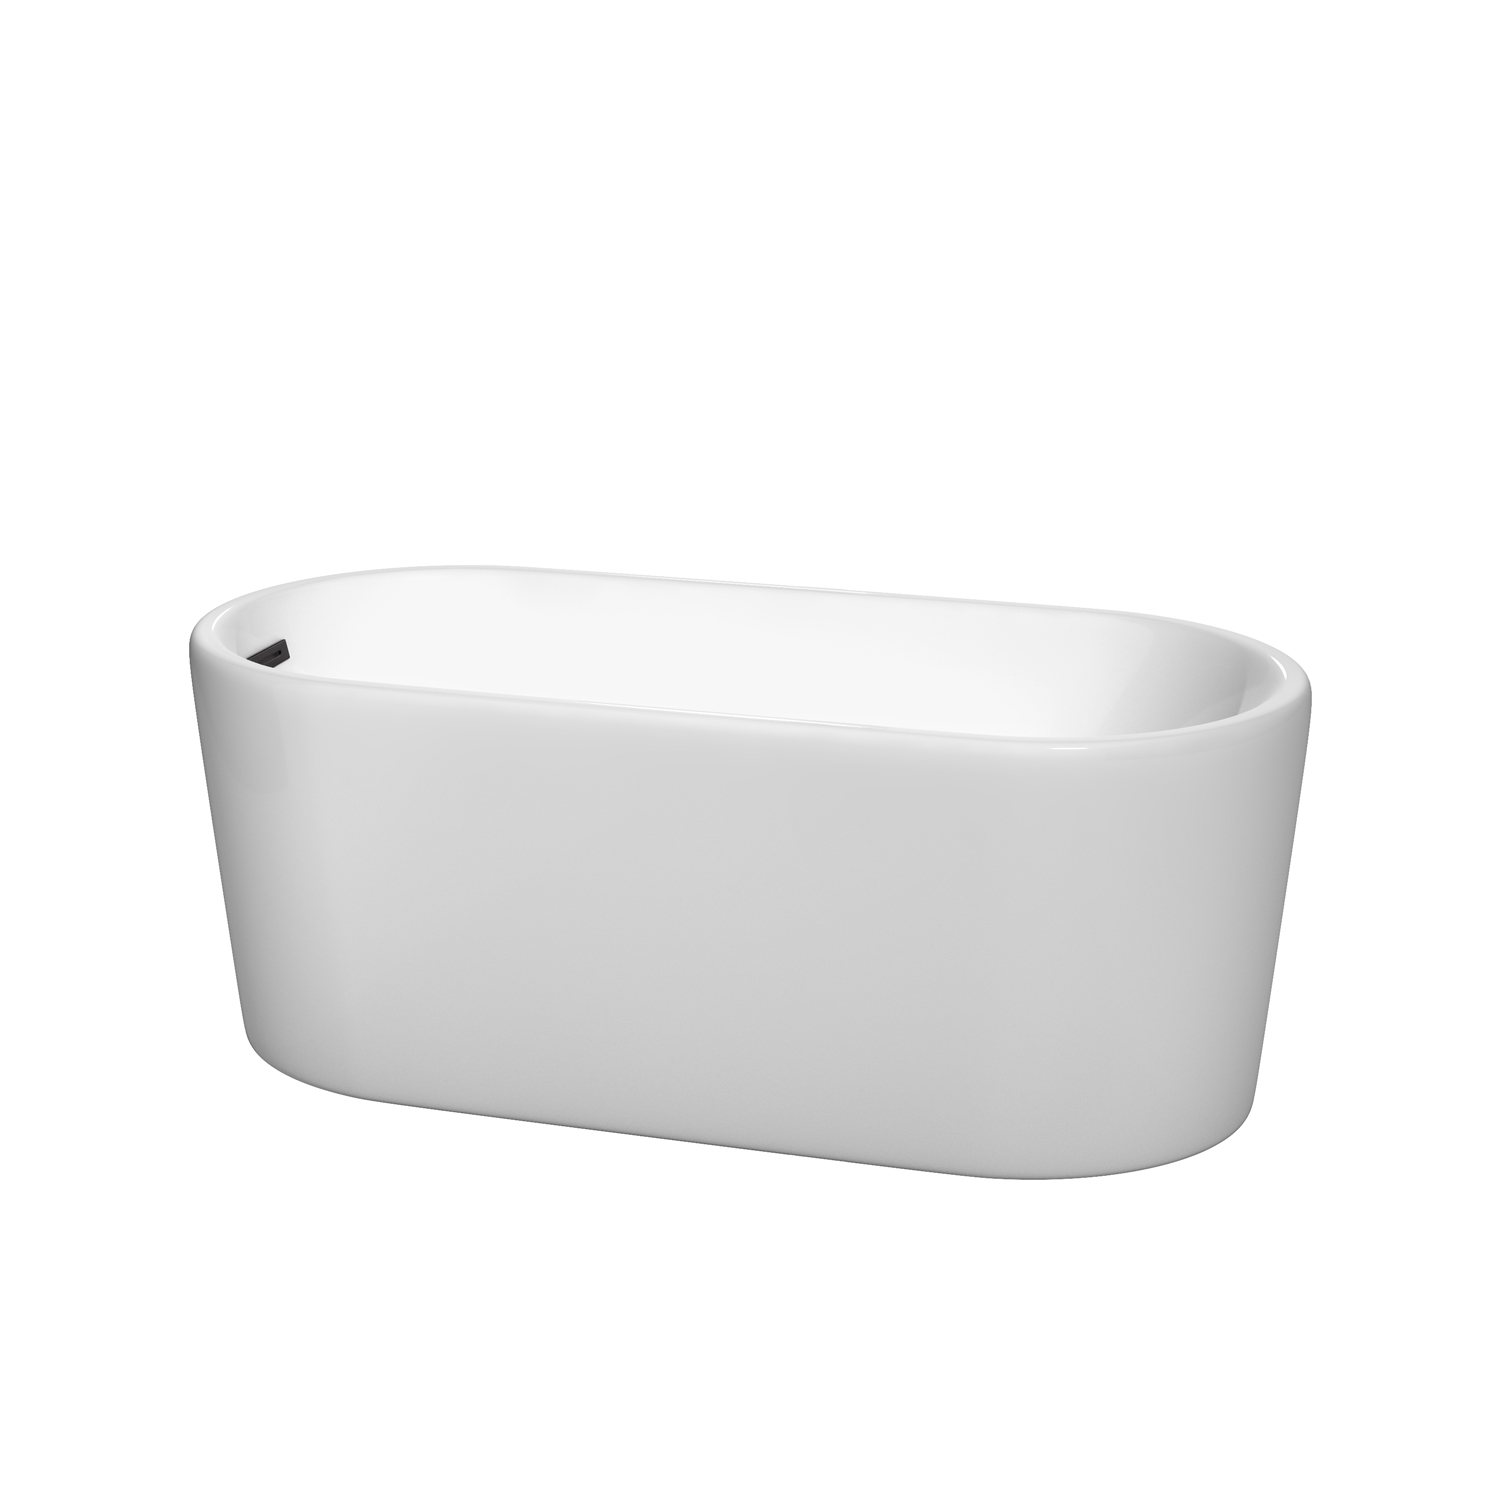 59" Freestanding Bathtub in White with Overflow Trim and Matte Black Pop-up Drain 